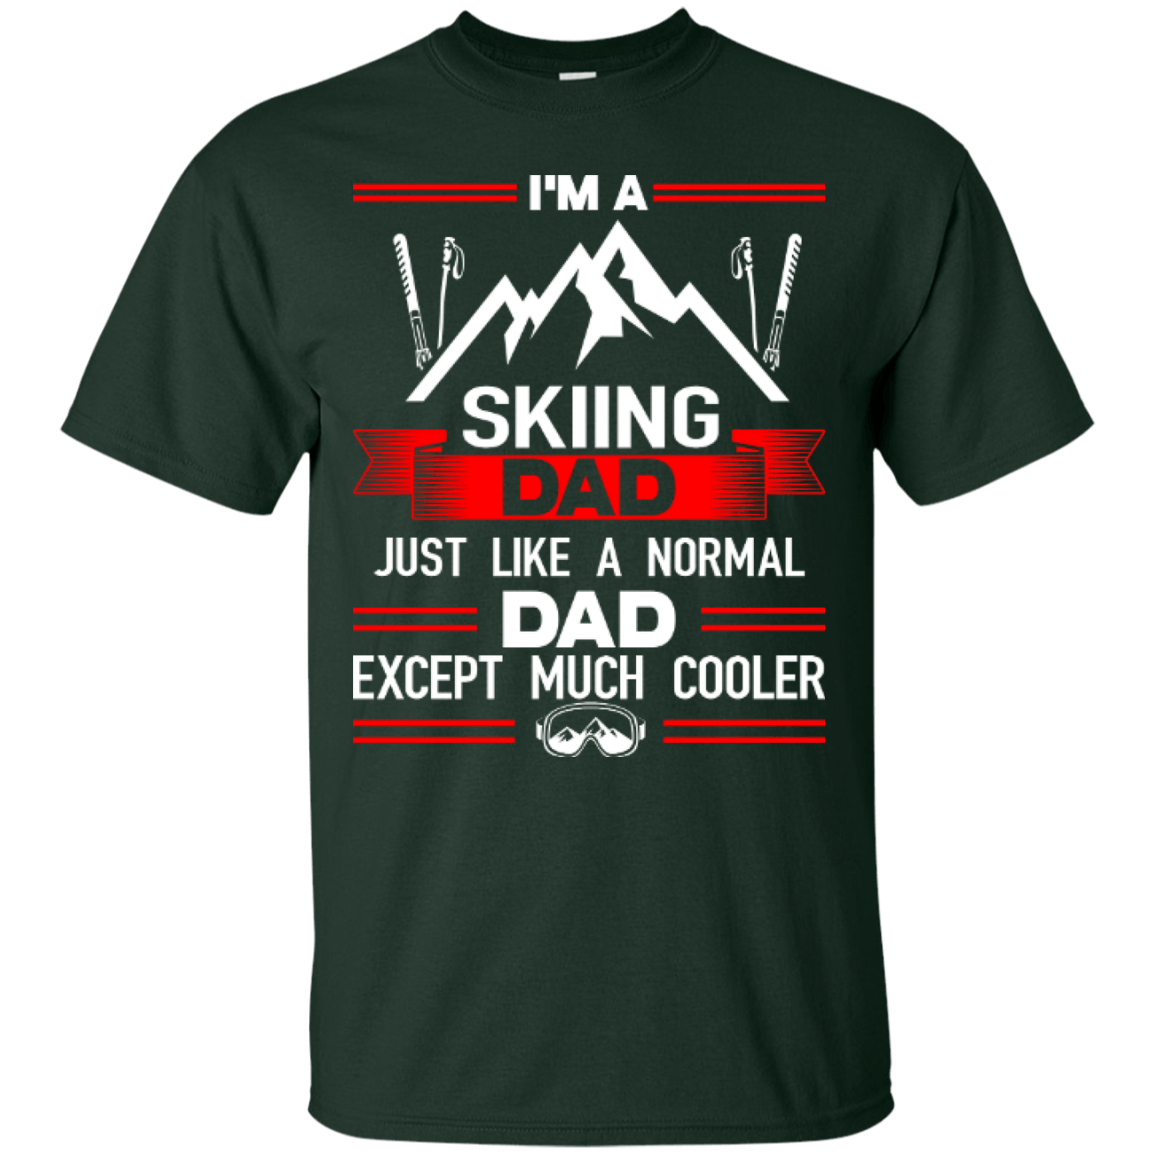 I'm A Skiing Dad Just Like A Normal Dad Except Much Cooler Tees - Powderaddicts